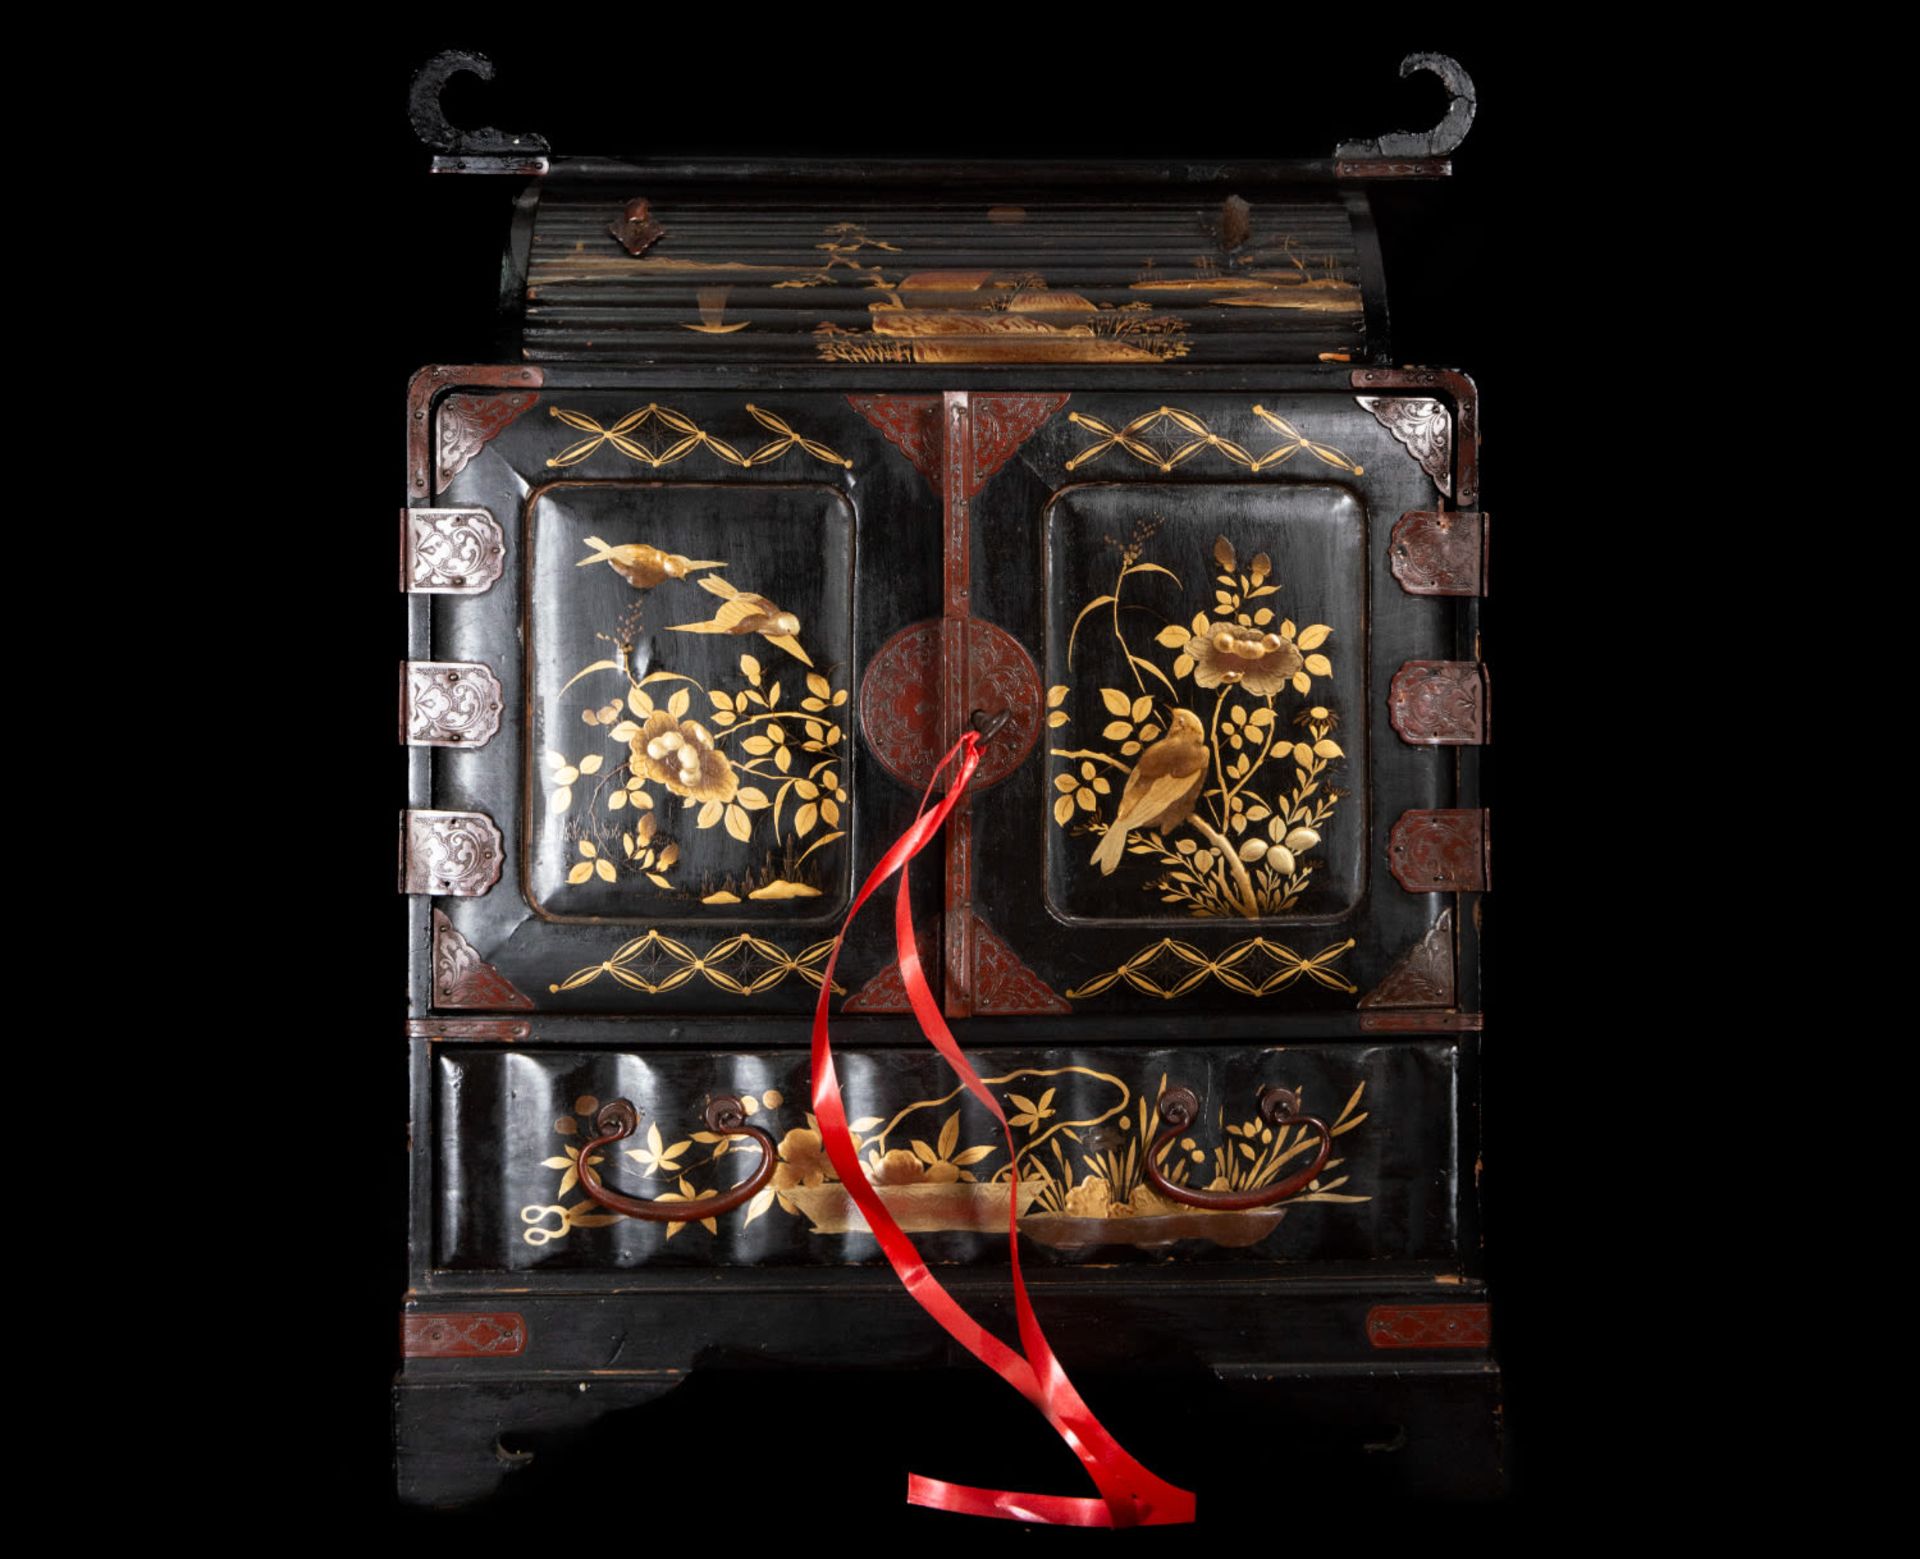 Exquisite Japanese Meiji tabletop cabinet in lacquered and gilded wood, 19th century